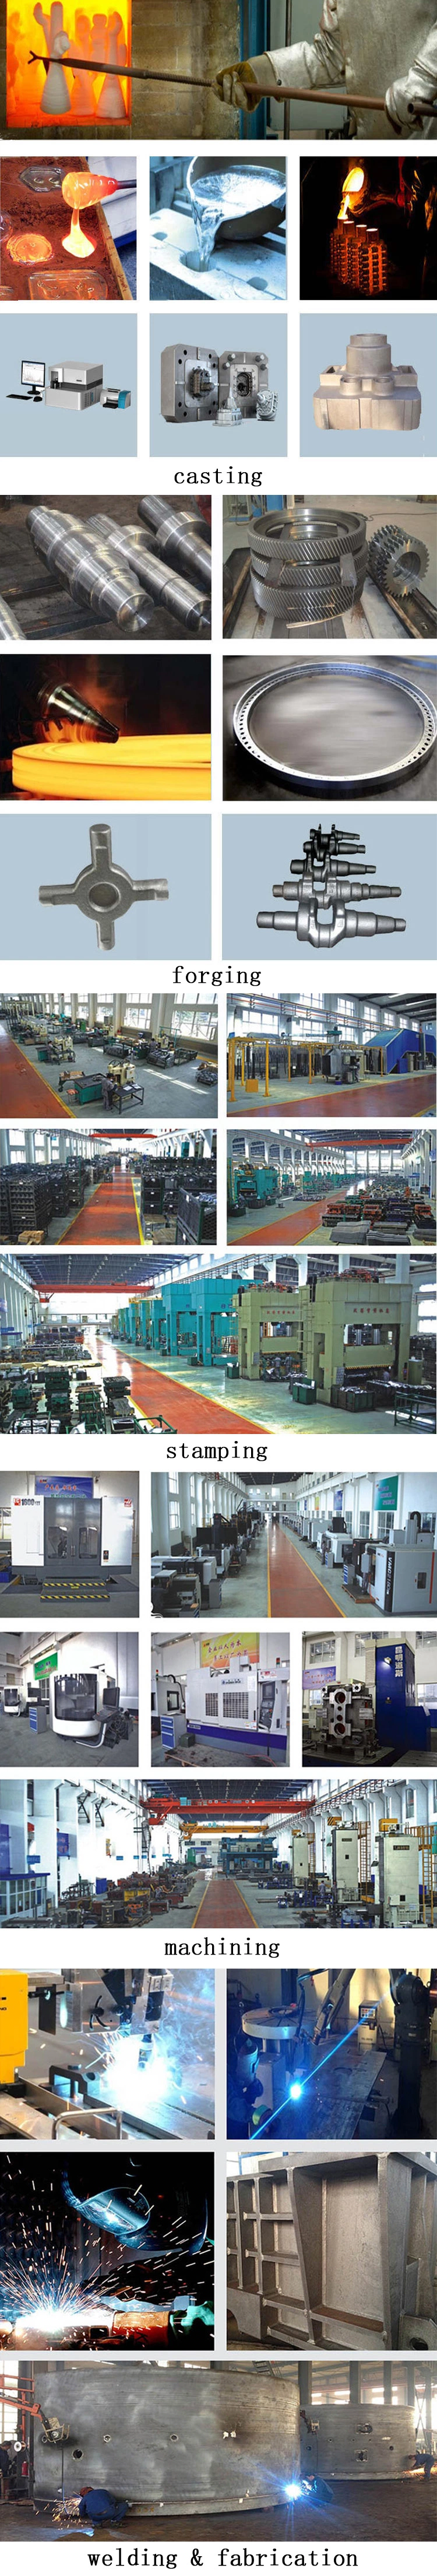 Densen Custom Stainless Steel Casting Parts, Leading China Foundry Supplier of Lost Wax Casting Parts